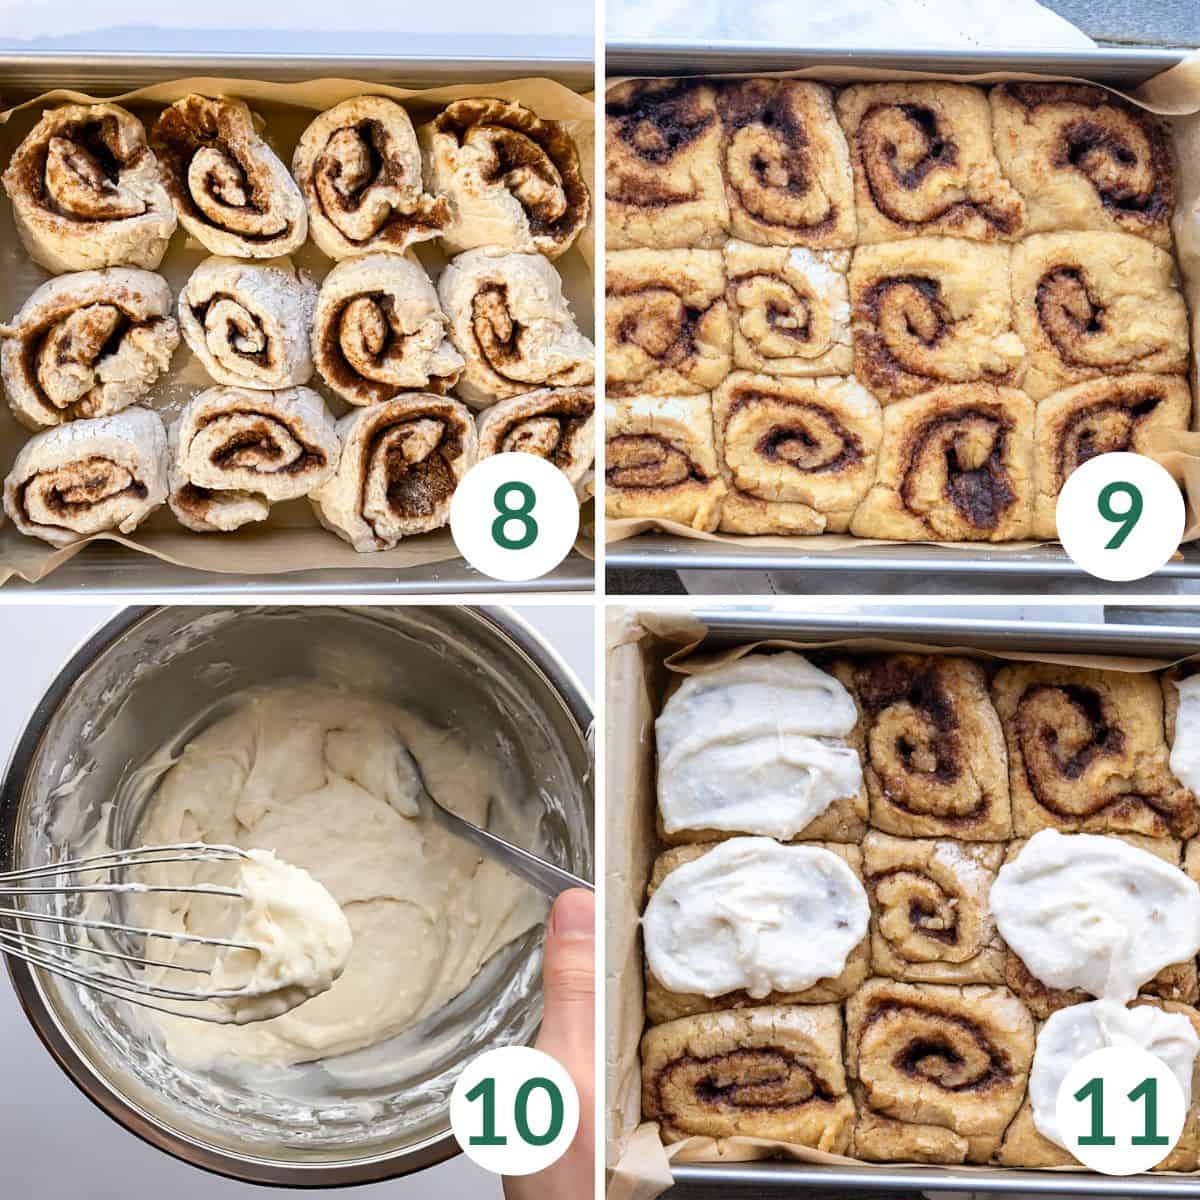 Steps 8-11 for this recipe, including a second rise of the cinnamon rolls, making the frosting, and baking them.